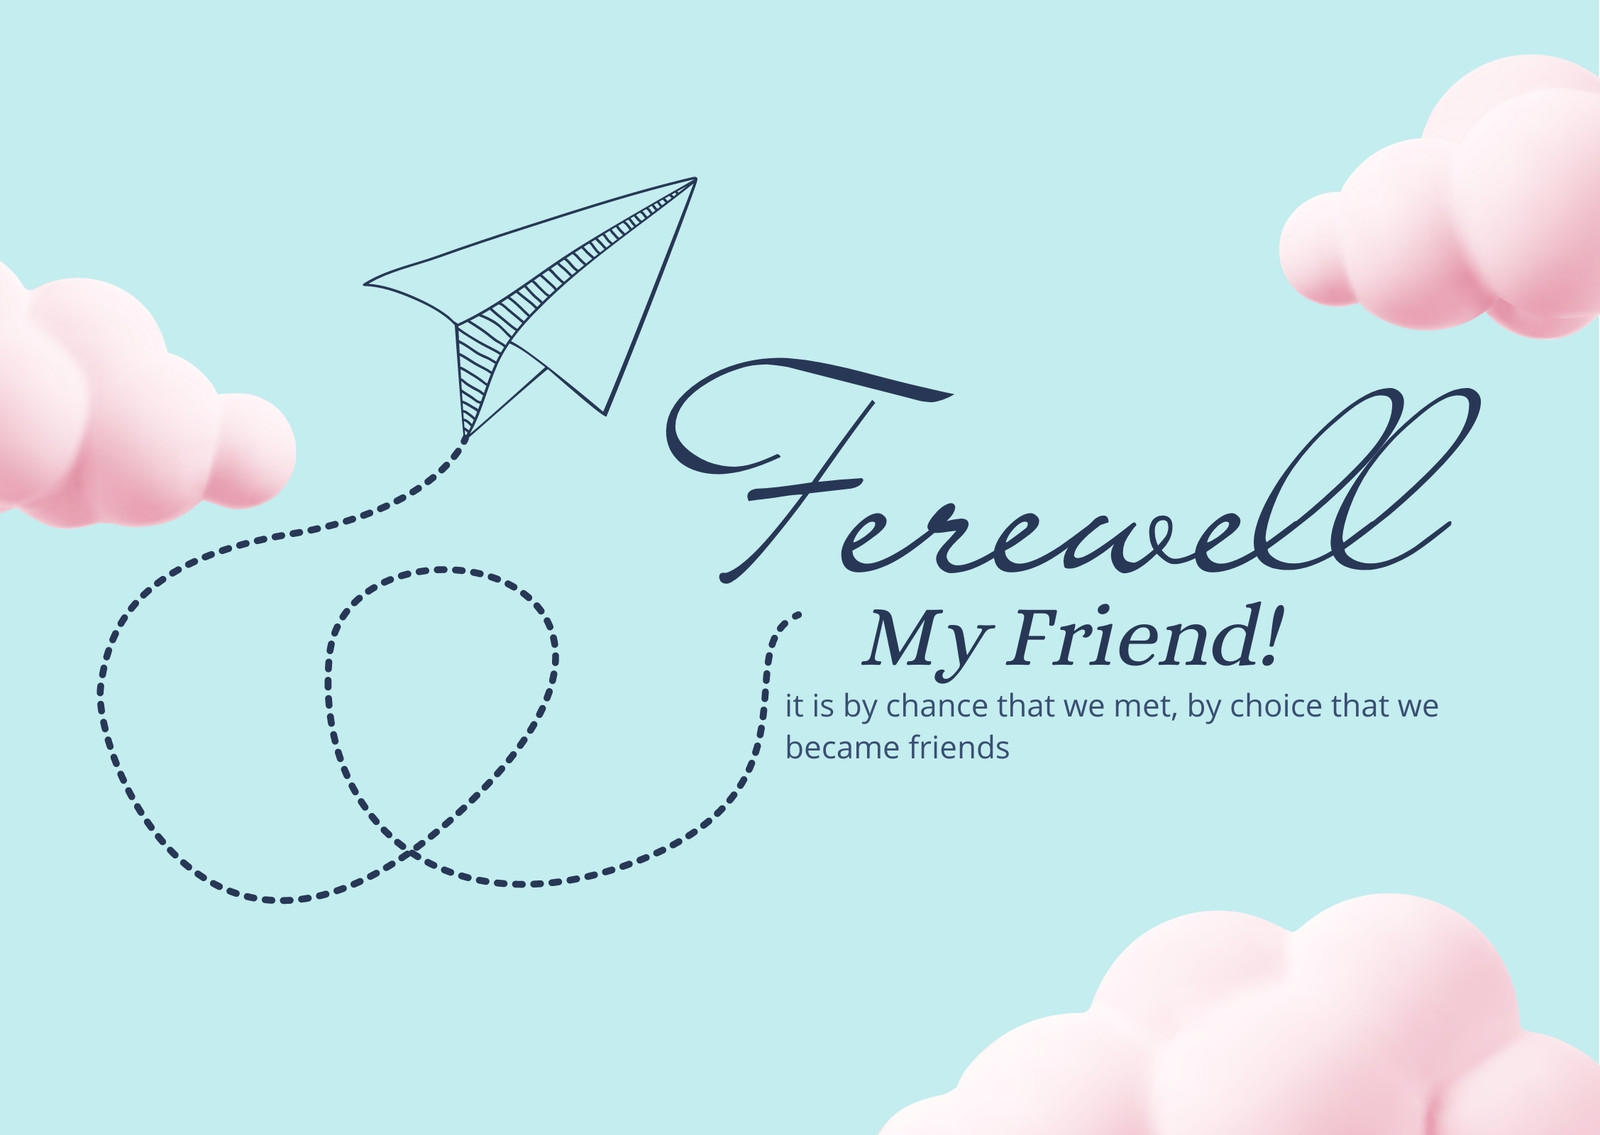 farewell cards coworker printable